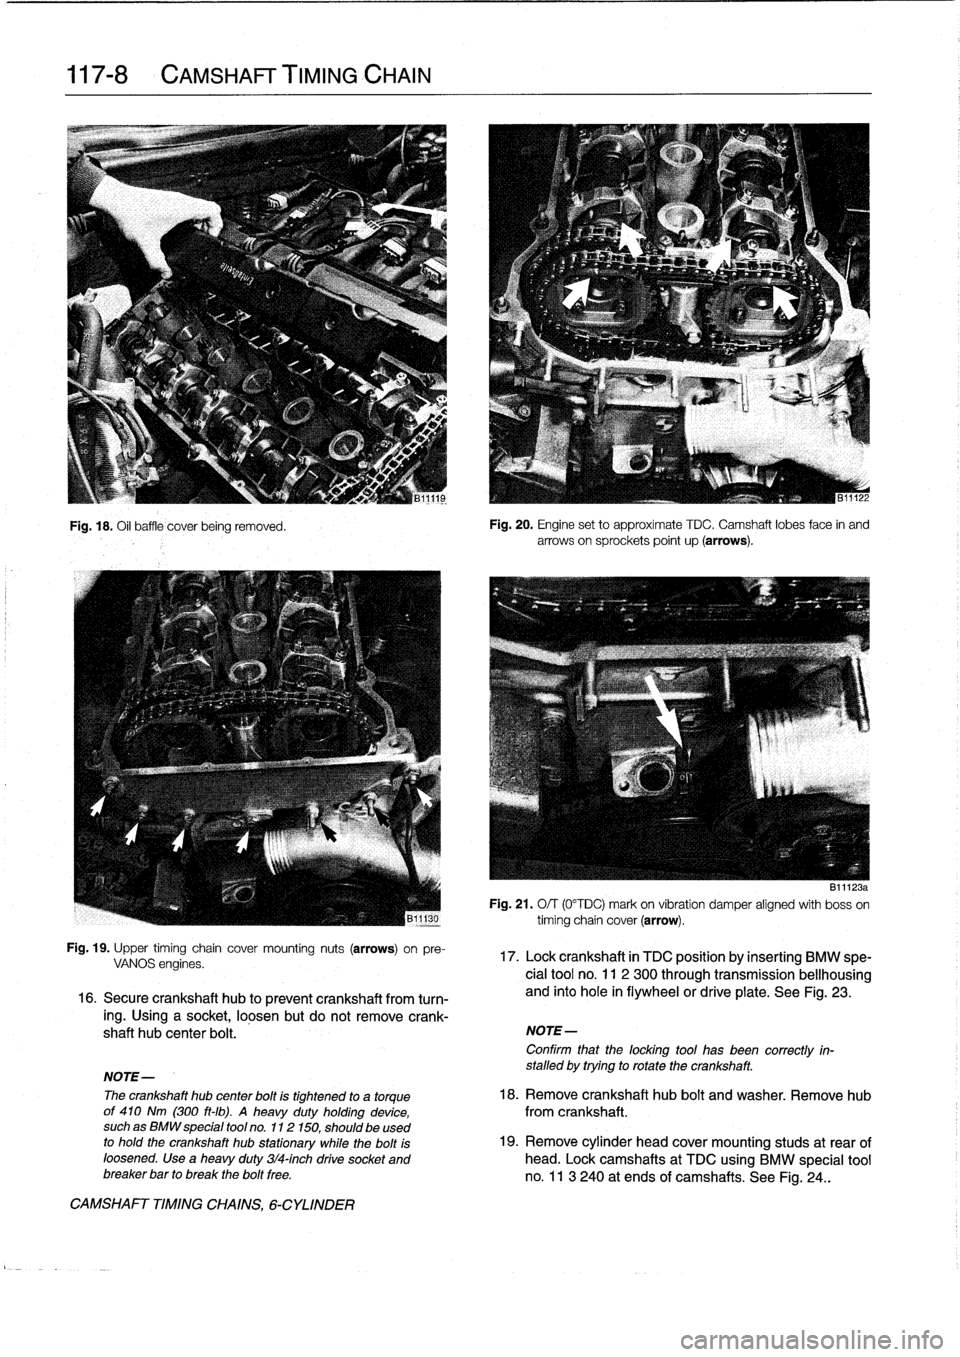 BMW 323i 1998 E36 Workshop Manual 
117-
8

	

CAMSHAFT
TIMING
CHAIN

Fig
.
18
.
Oil
baffle
cover
being
removed
.

Fig
.
19
.
Upper
timing
chaincover
mounting
nuts
(arrows)
on
pre-
VANOS
engines
.

16
.
Secure
crankshaft
hub
to
preven